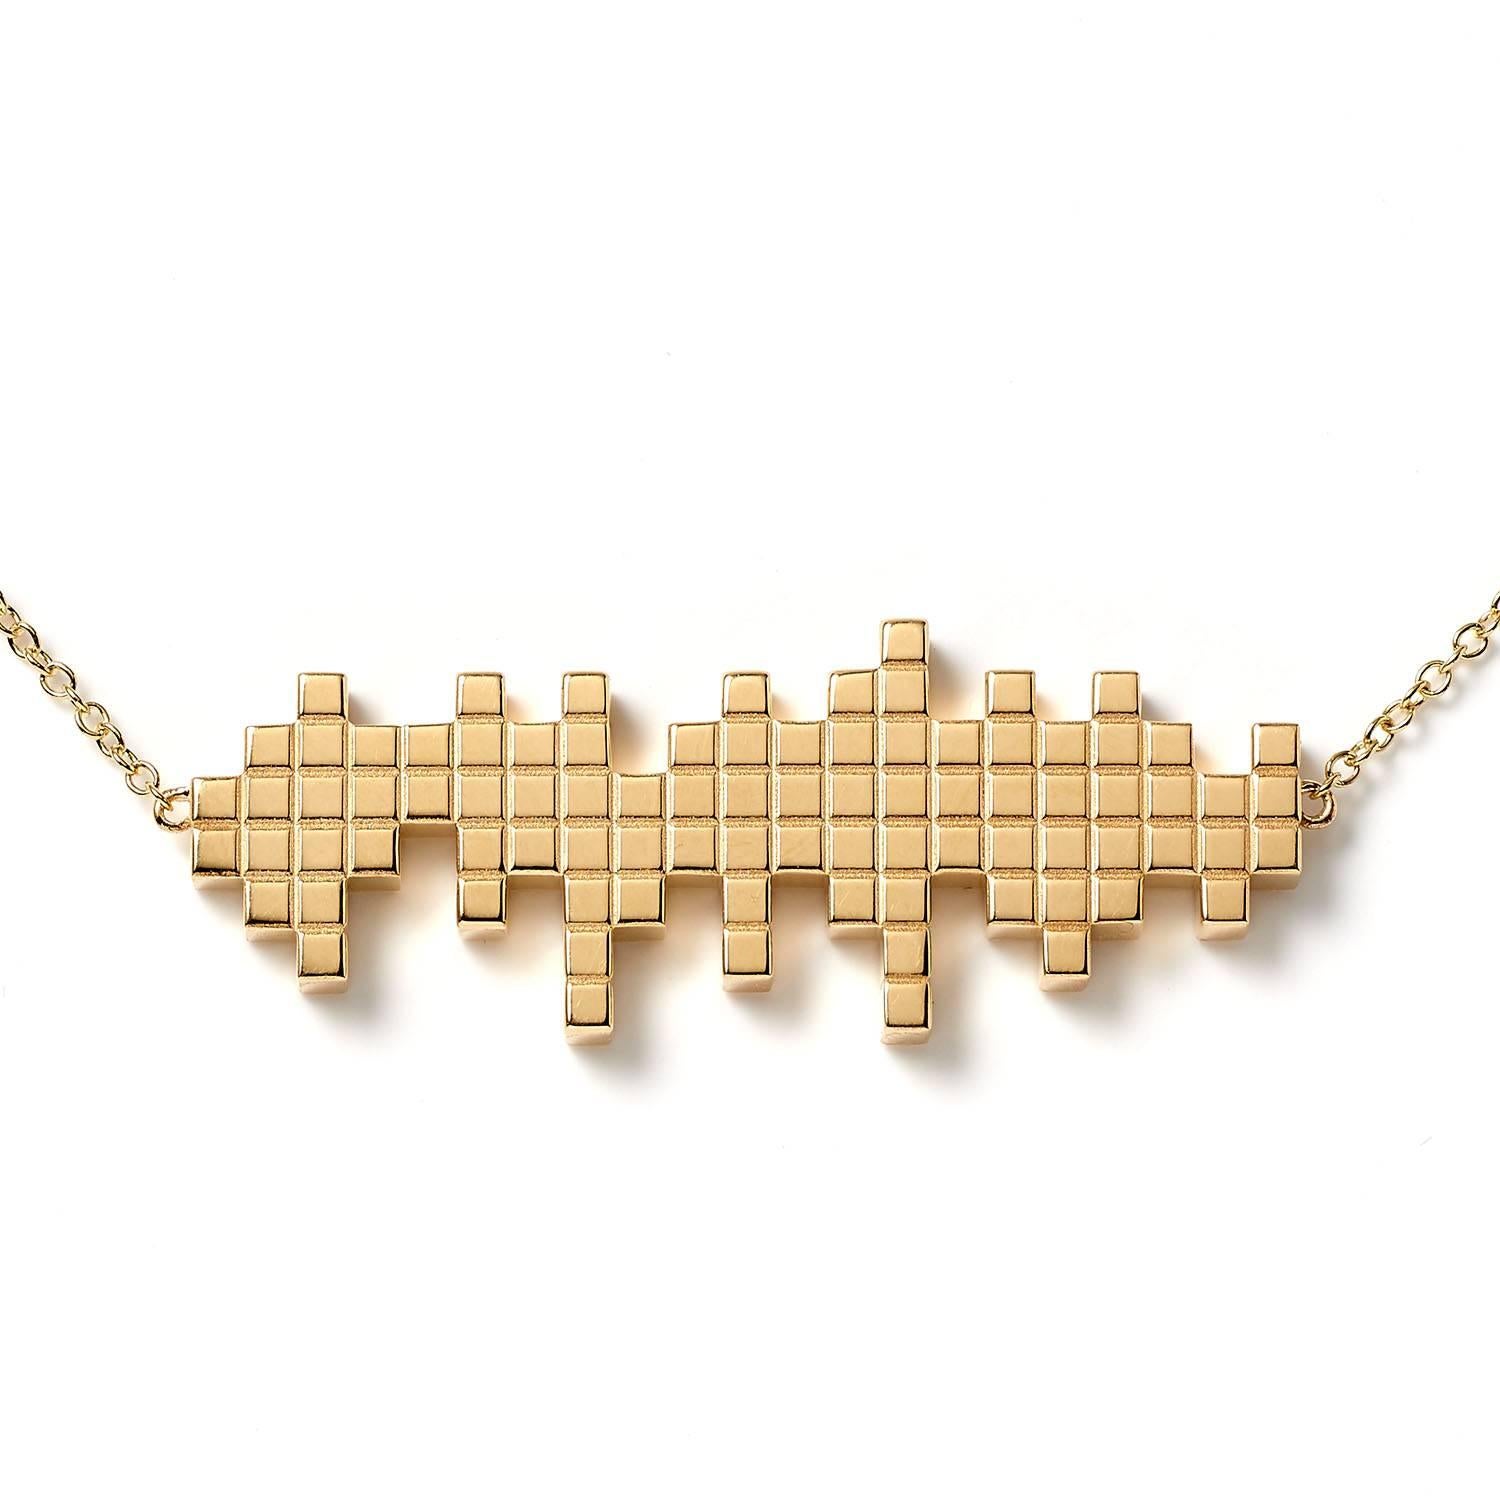 Yellow gold "Equalizer" necklace by Francesca Grima

18ct. Yellow Gold on Yellow Gold Chain.

・Polished 18ct. Yellow Gold
・Pendant length: 1.9cm
・Pendant width: 4.8cm
・Chain can be worn in three lengths: 43.5cm, 40.5cm, 37.5cm
・Lobster